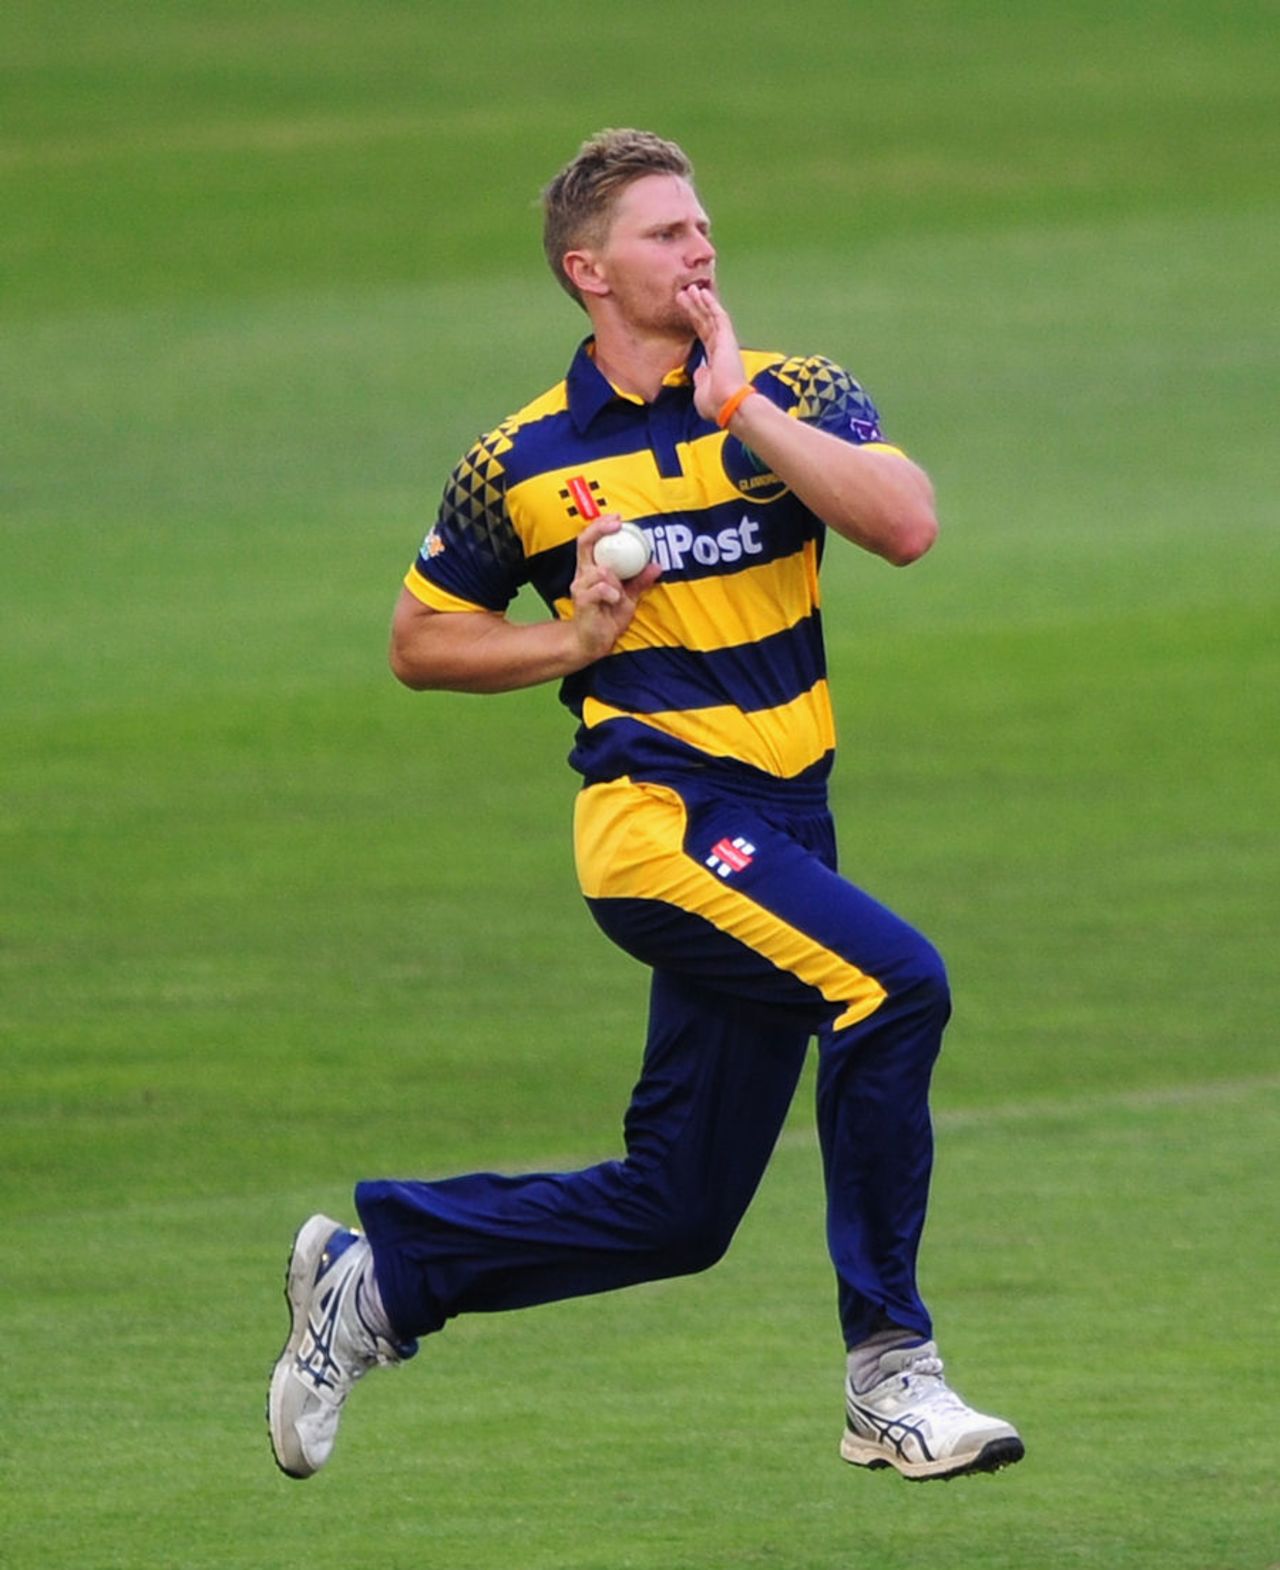 Tim van der Gugten in action, Glamorgan v Gloucestershire, Royal London One-Day Cup, Cardiff, June 6, 2016